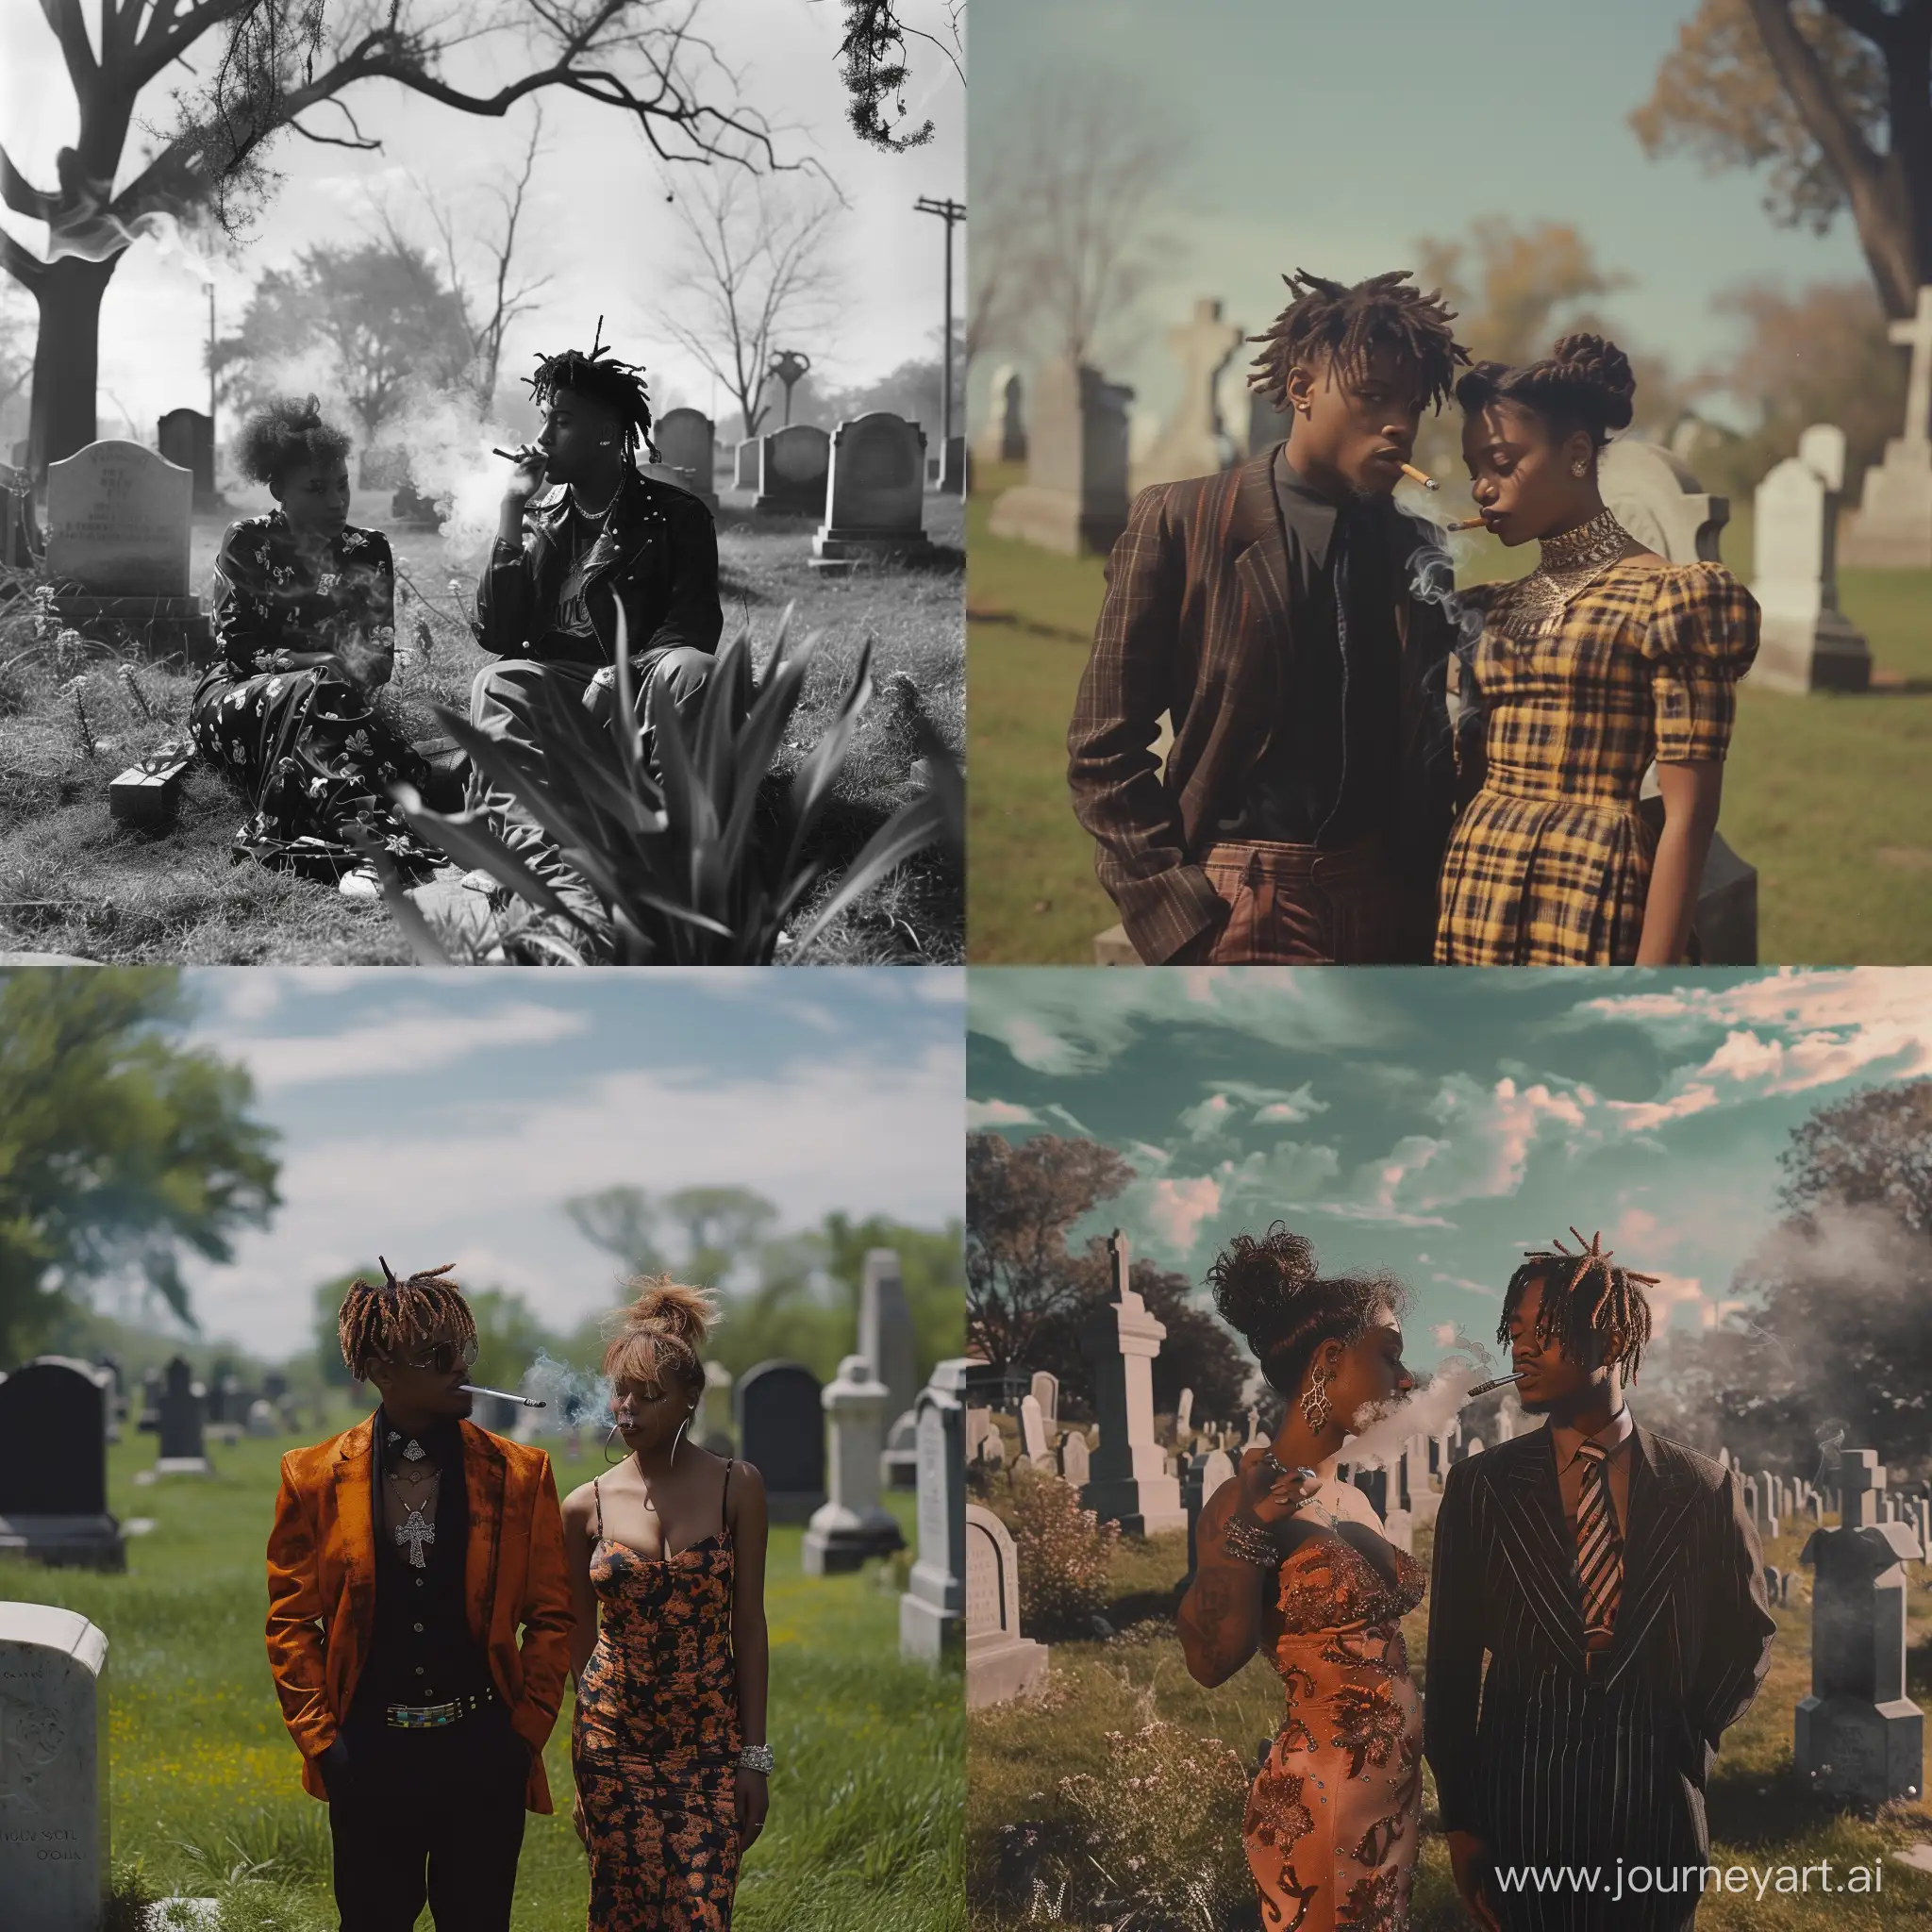 A 1950s Movie Scene of Juice WRLD Smoking with a Woman in the Cemetery.